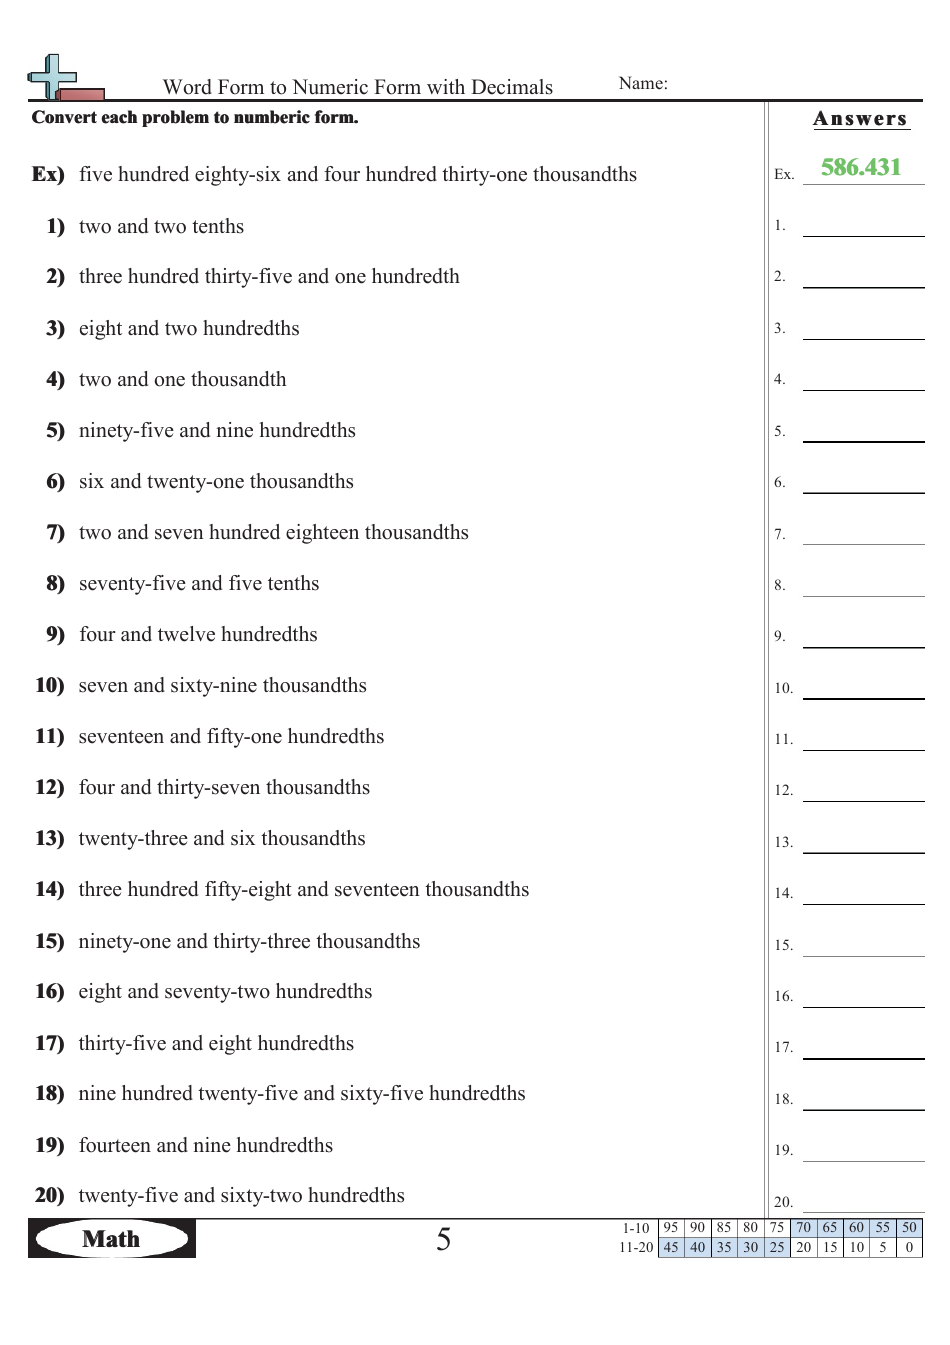 Word Form To Numeric Form With Decimals Worksheet With Answers Download Printable Pdf Templateroller